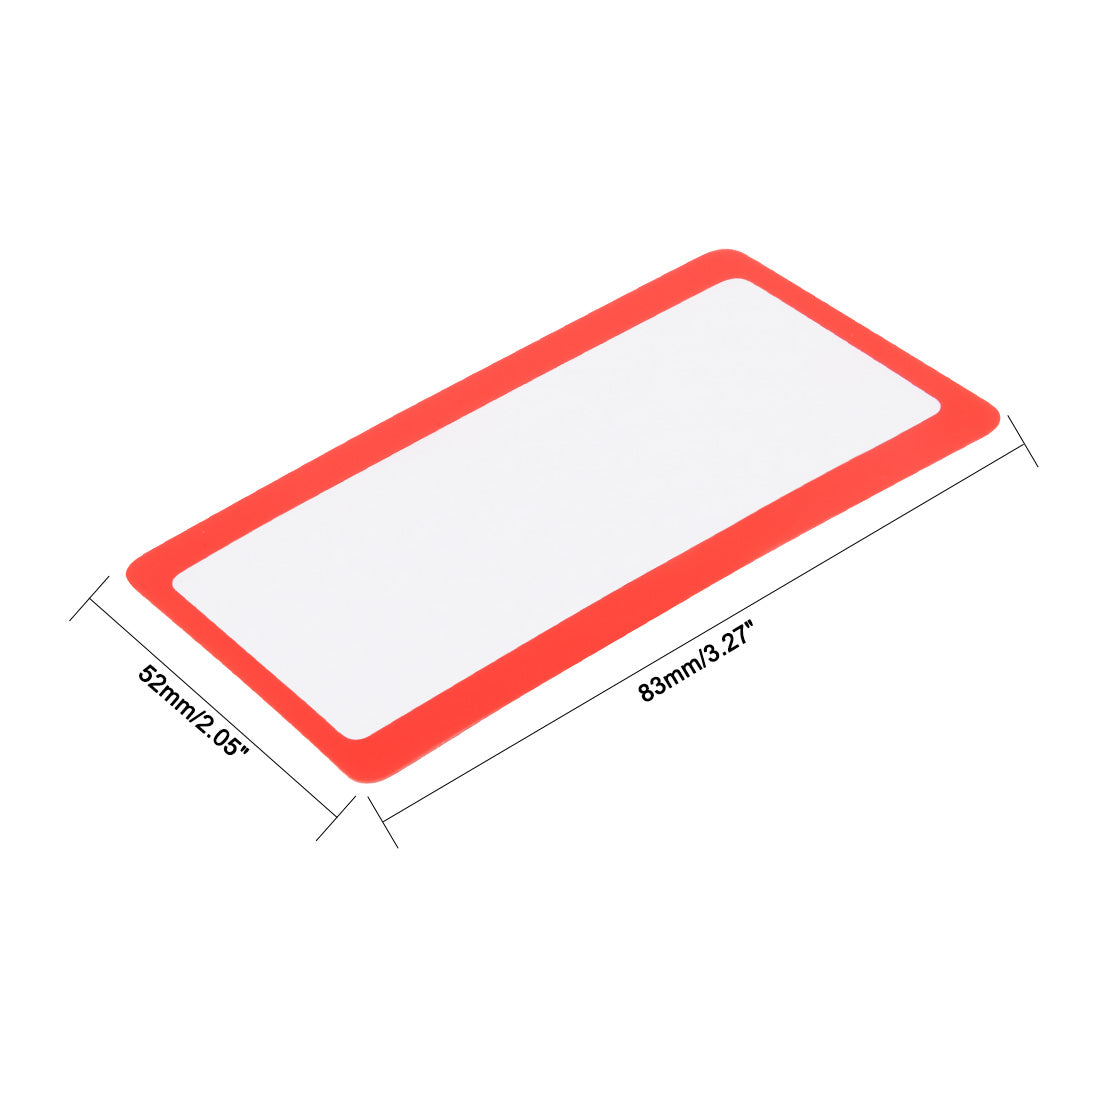 uxcell uxcell Fresnel Lens Magnifier 75mm x 40mm 3X 300% Credit Card Magnifier for Seniors Macular Degeneration Maps Jewelry Repair Fire Starter Red 10pcs